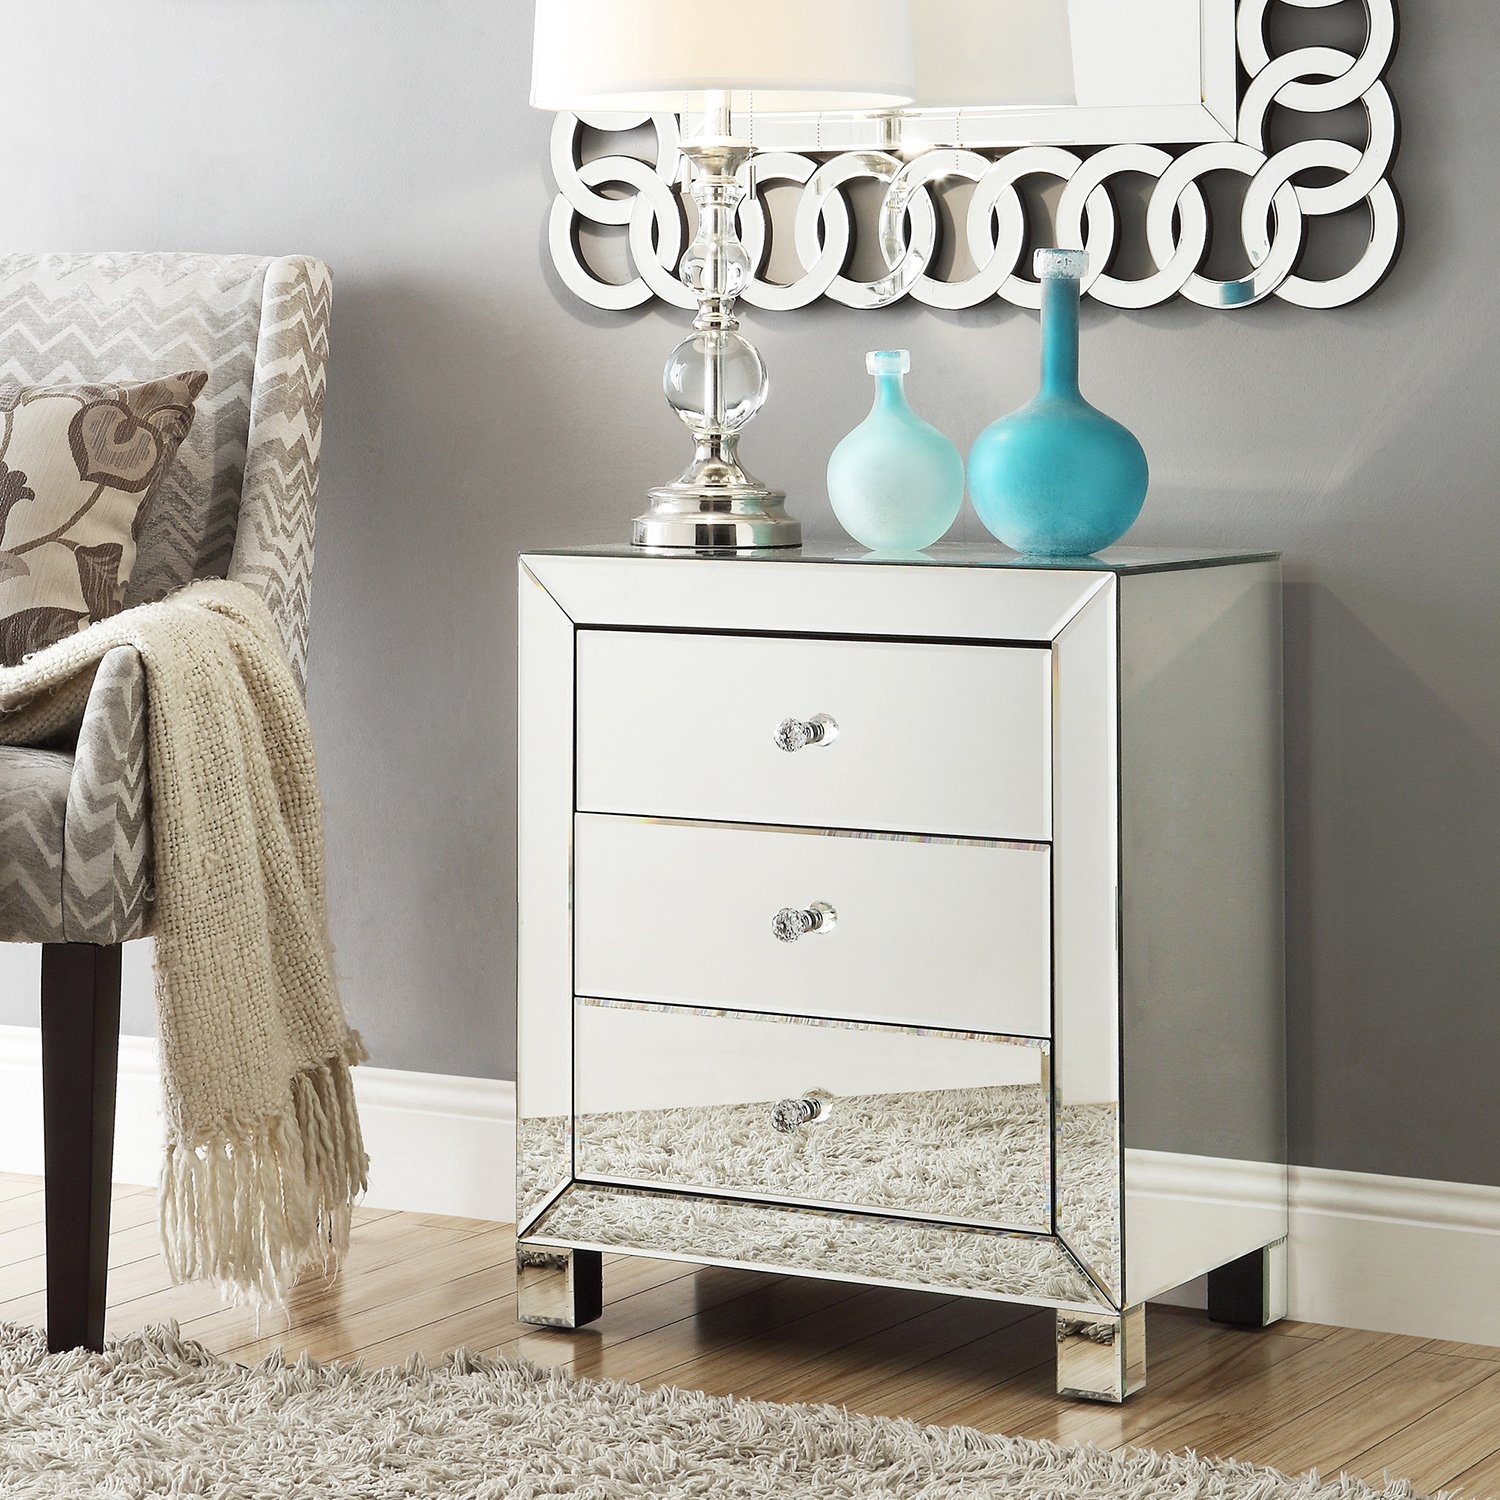 inspire esmond mirrored drawer accent table your way get three mosaic top outdoor dining cream round brass and glass coffee dorm room gifts corner computer desk with hutch study